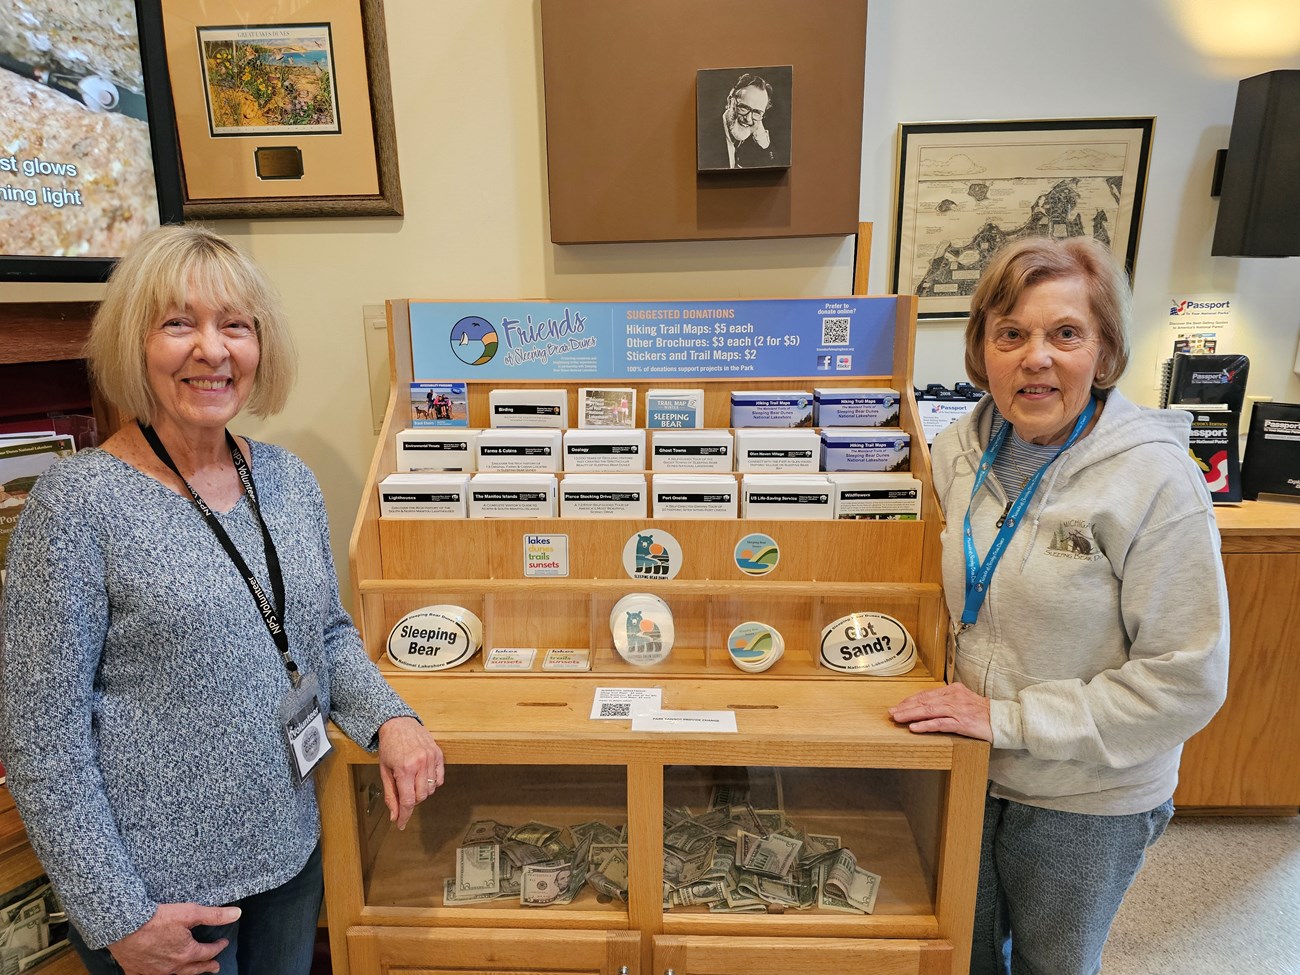 Two volunteers standing next to a donation display with books and stickers.